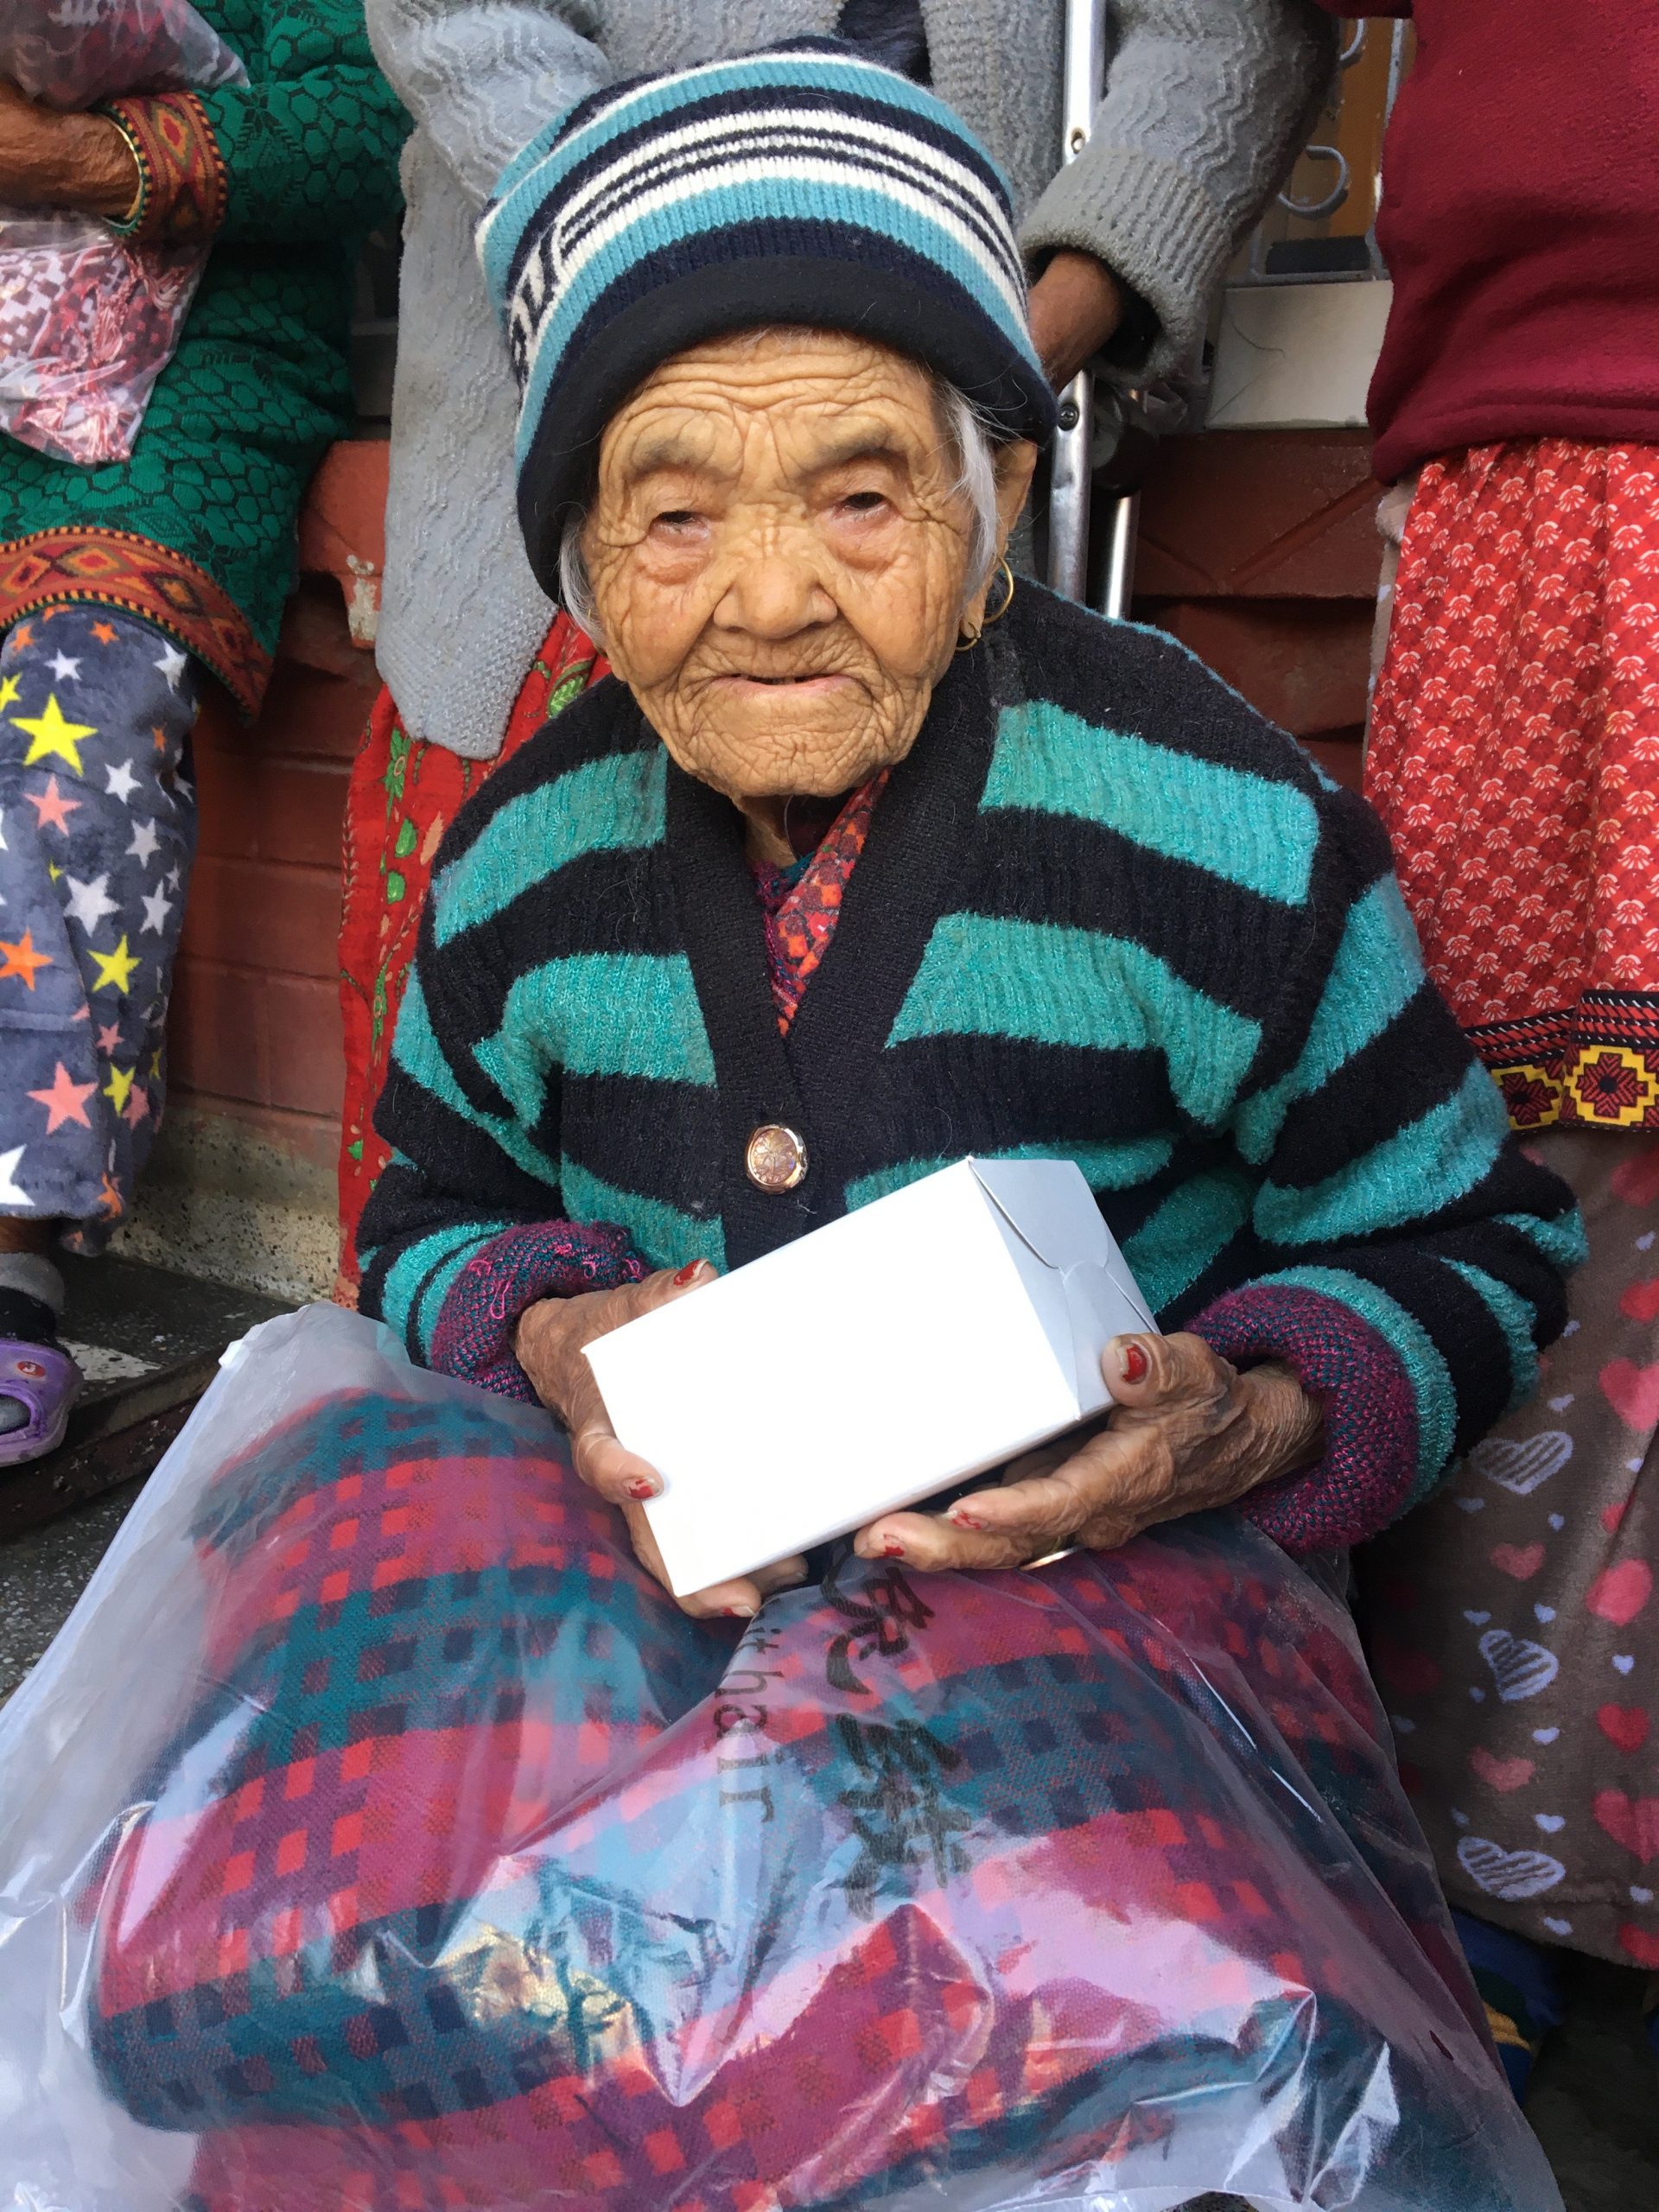 This 107 year old woman was delighted with her shawl